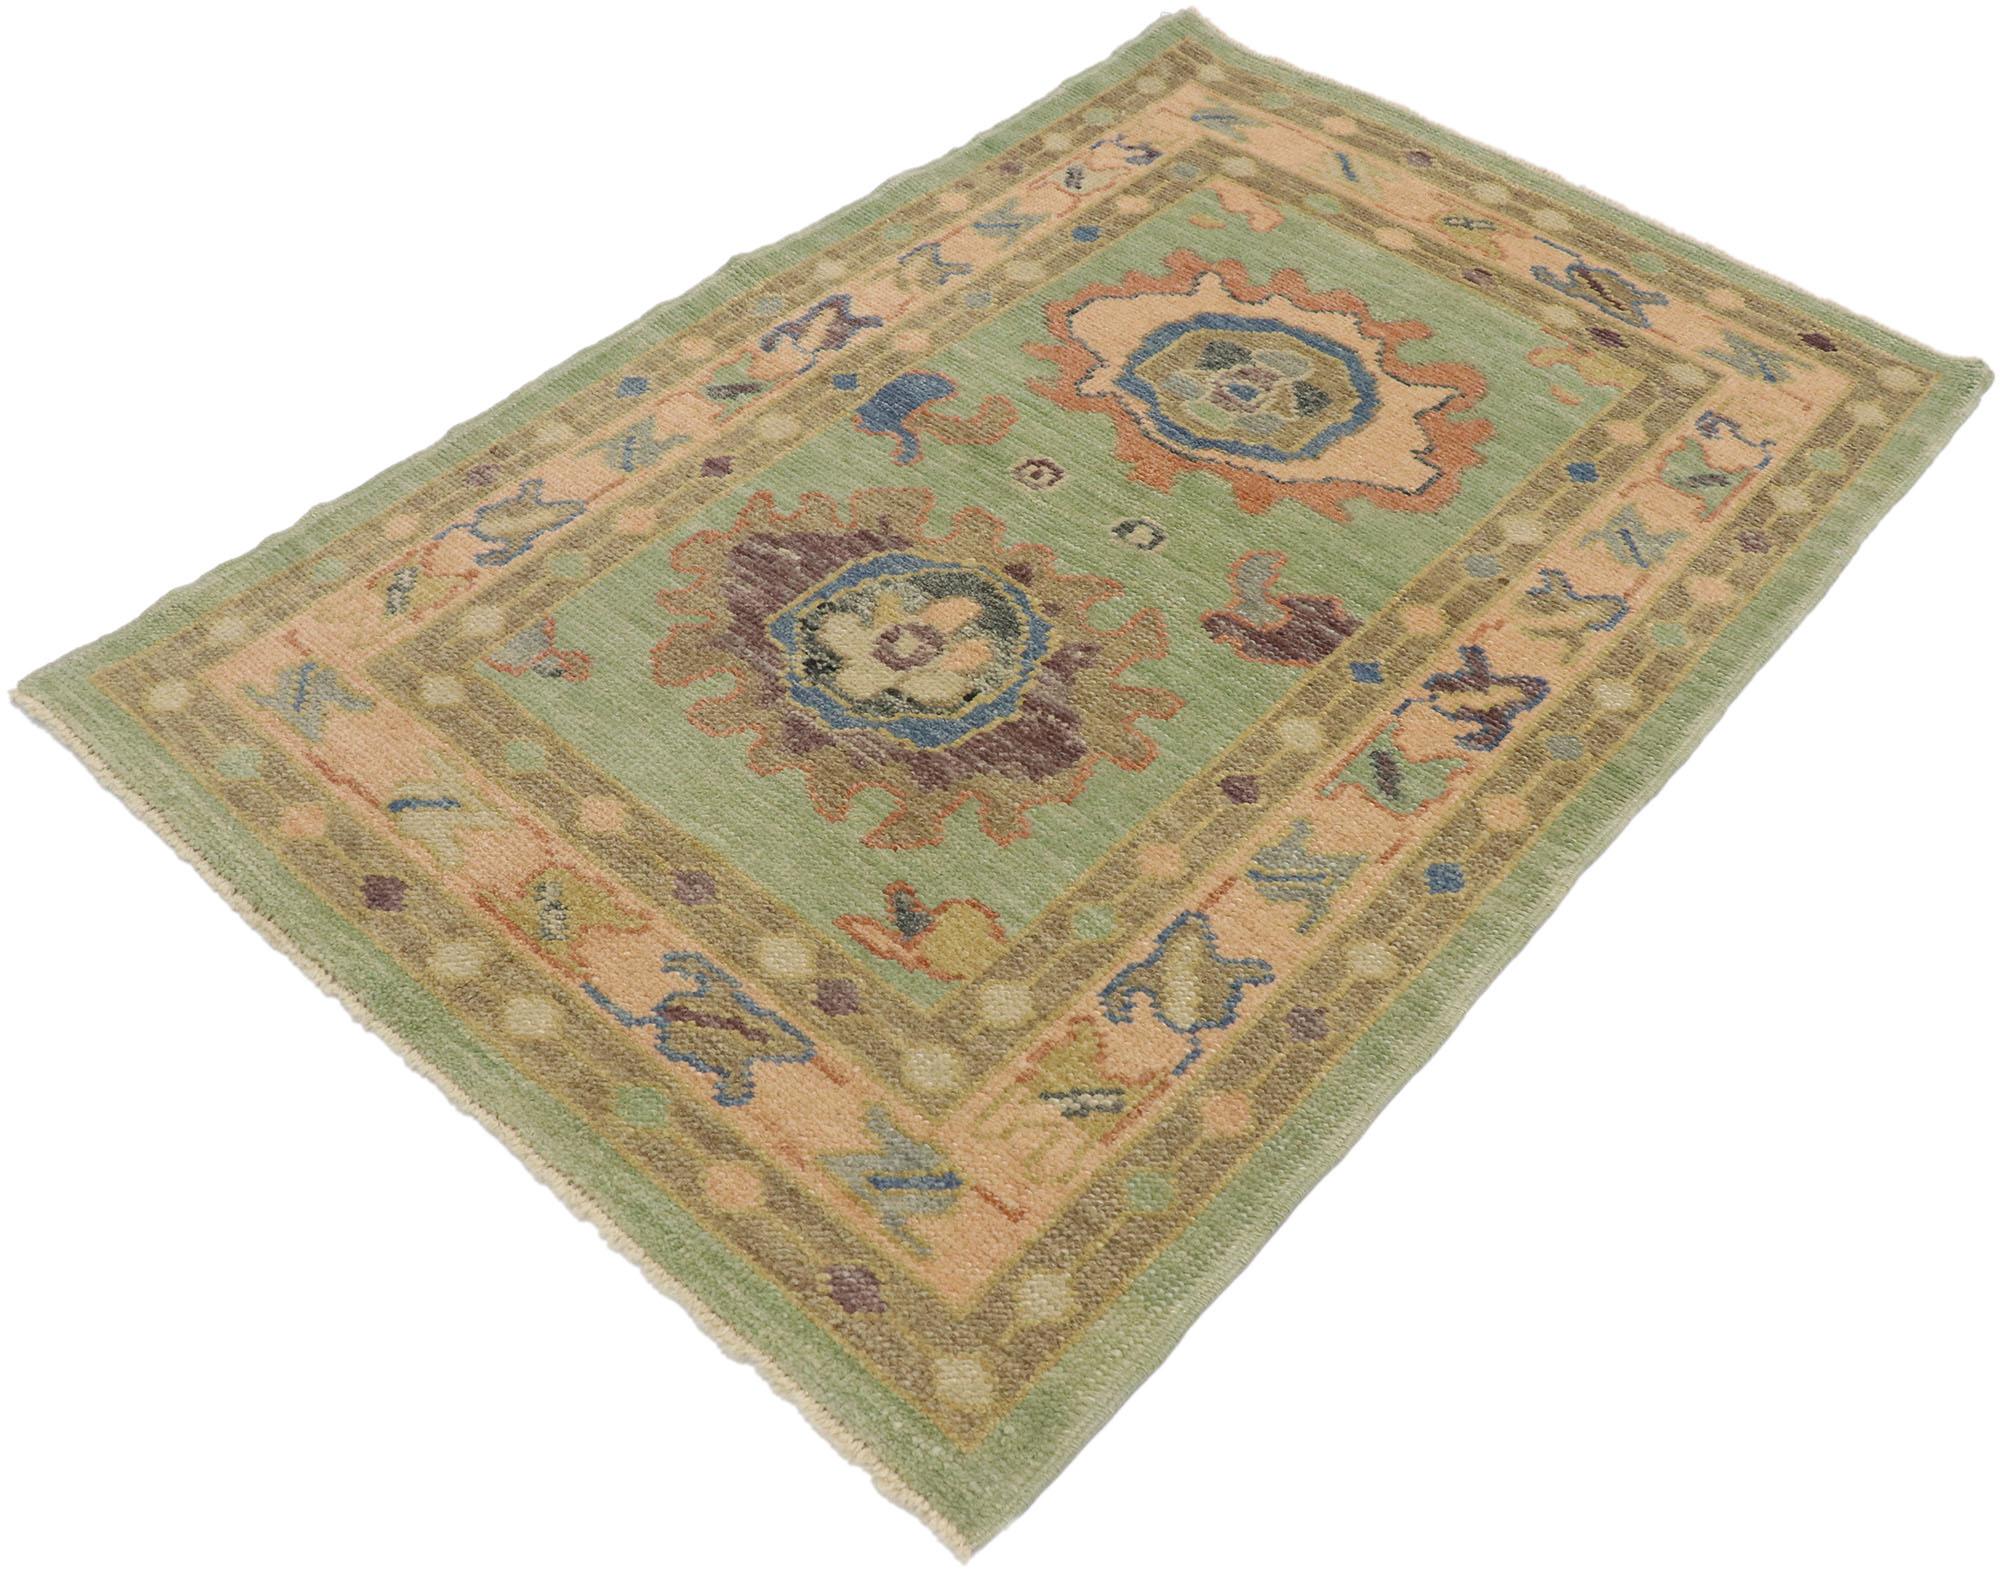 53381, new contemporary Turkish Oushak rug with Modern style and pastel colors. Blending elements from the modern world with pastel colors, this hand knotted wool contemporary Turkish Oushak rug will boost the coziness factor in nearly any space.